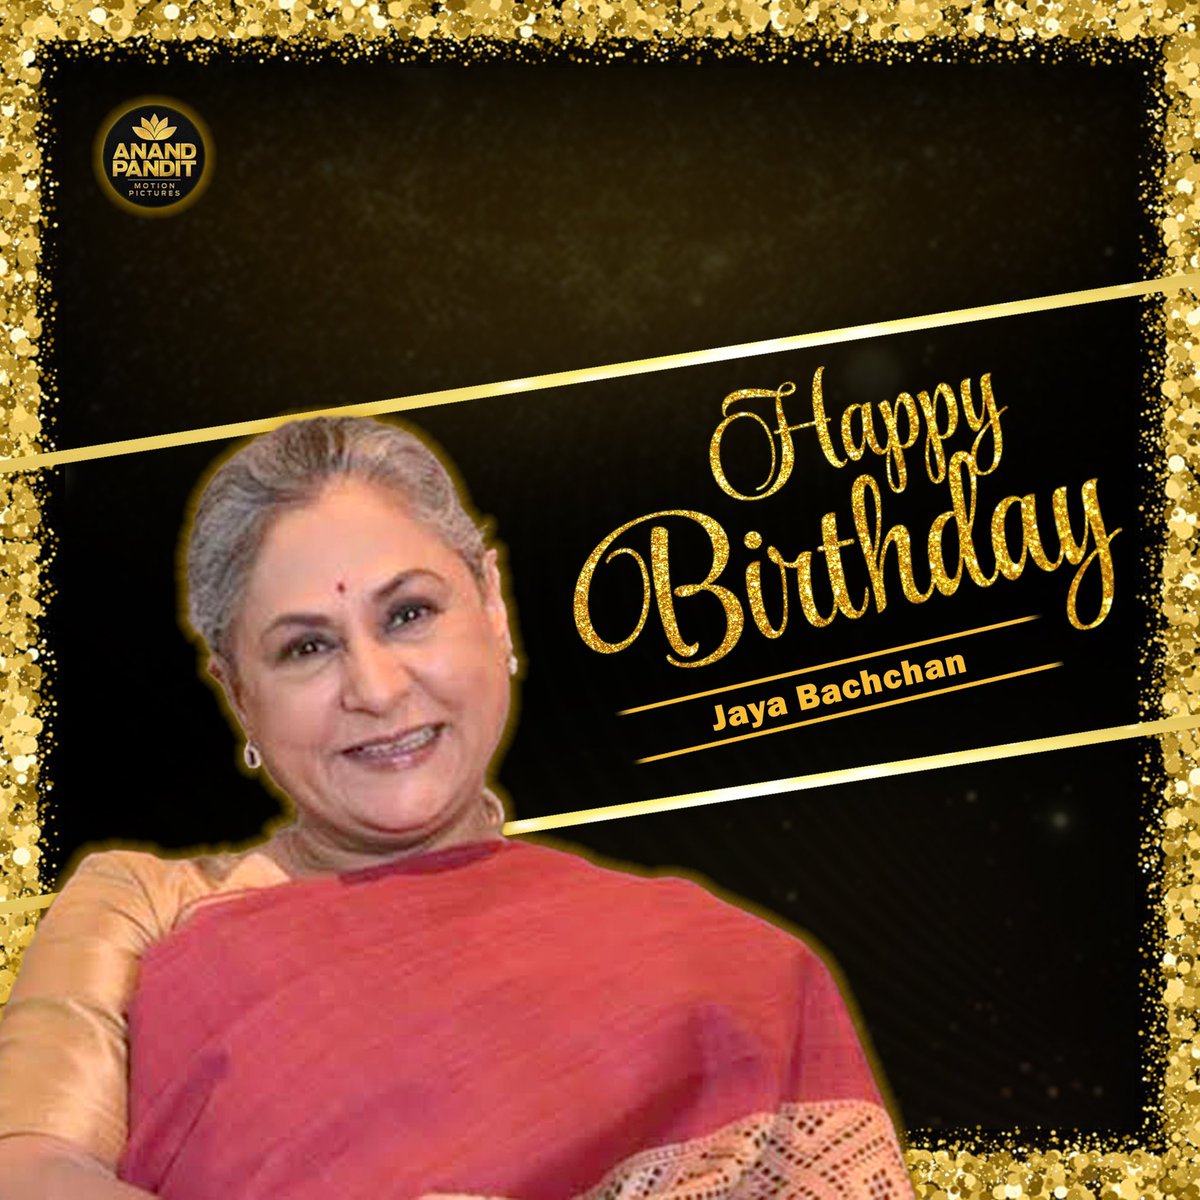 Wishing Jaya ji a very Happy Birthday. From your iconic roles to your unwavering dedication, your professional journey has been nothing short of inspirational. Here's to a woman whose journey serves as a beacon of inspiration for us all.